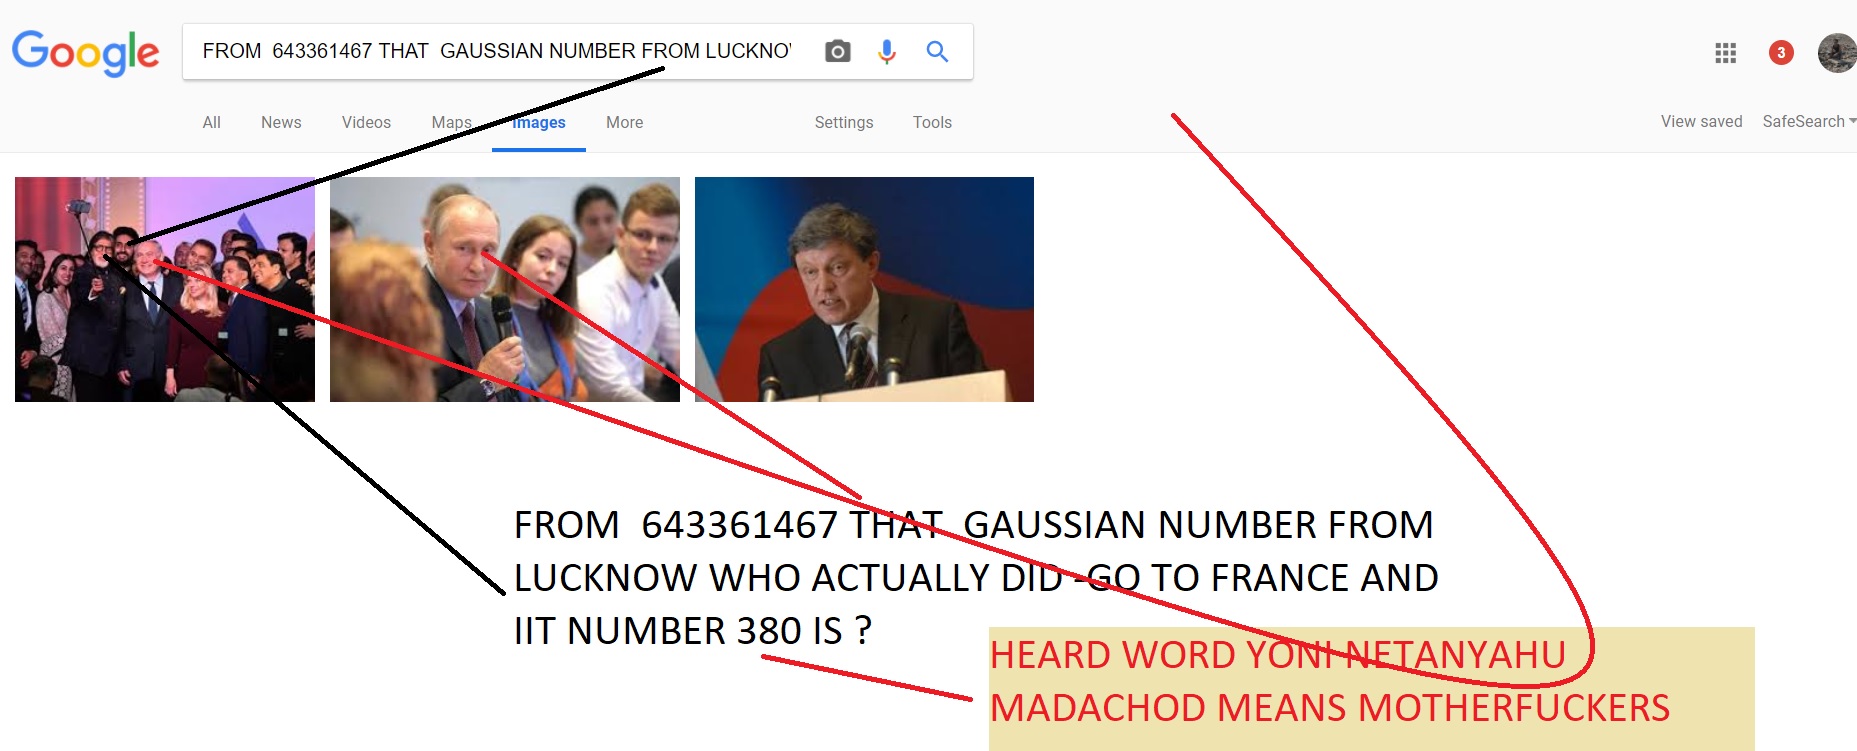 FROM 643361467 THAT GAUSSIAN NUMBER FROM LUCKNOW WHO ACTUALLY DID -GO TO FRANCE AND IIT NUMBER 380 IS